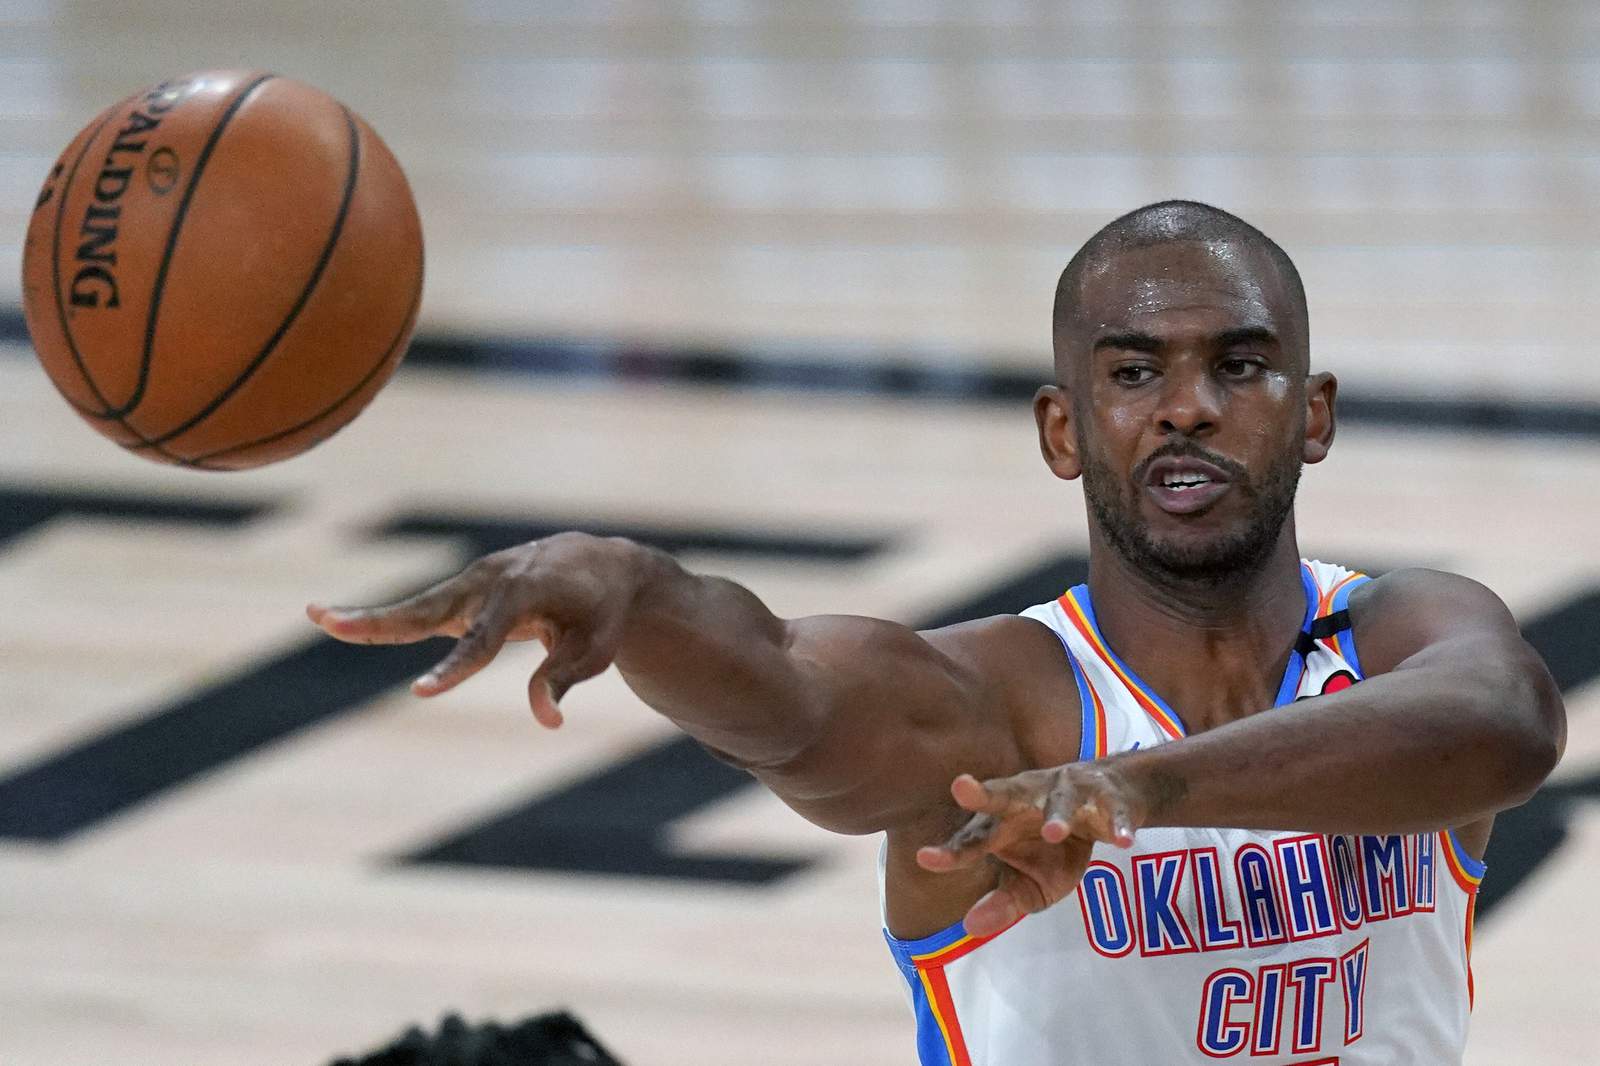 All-Star guard Chris Paul sent to Suns in blockbuster trade